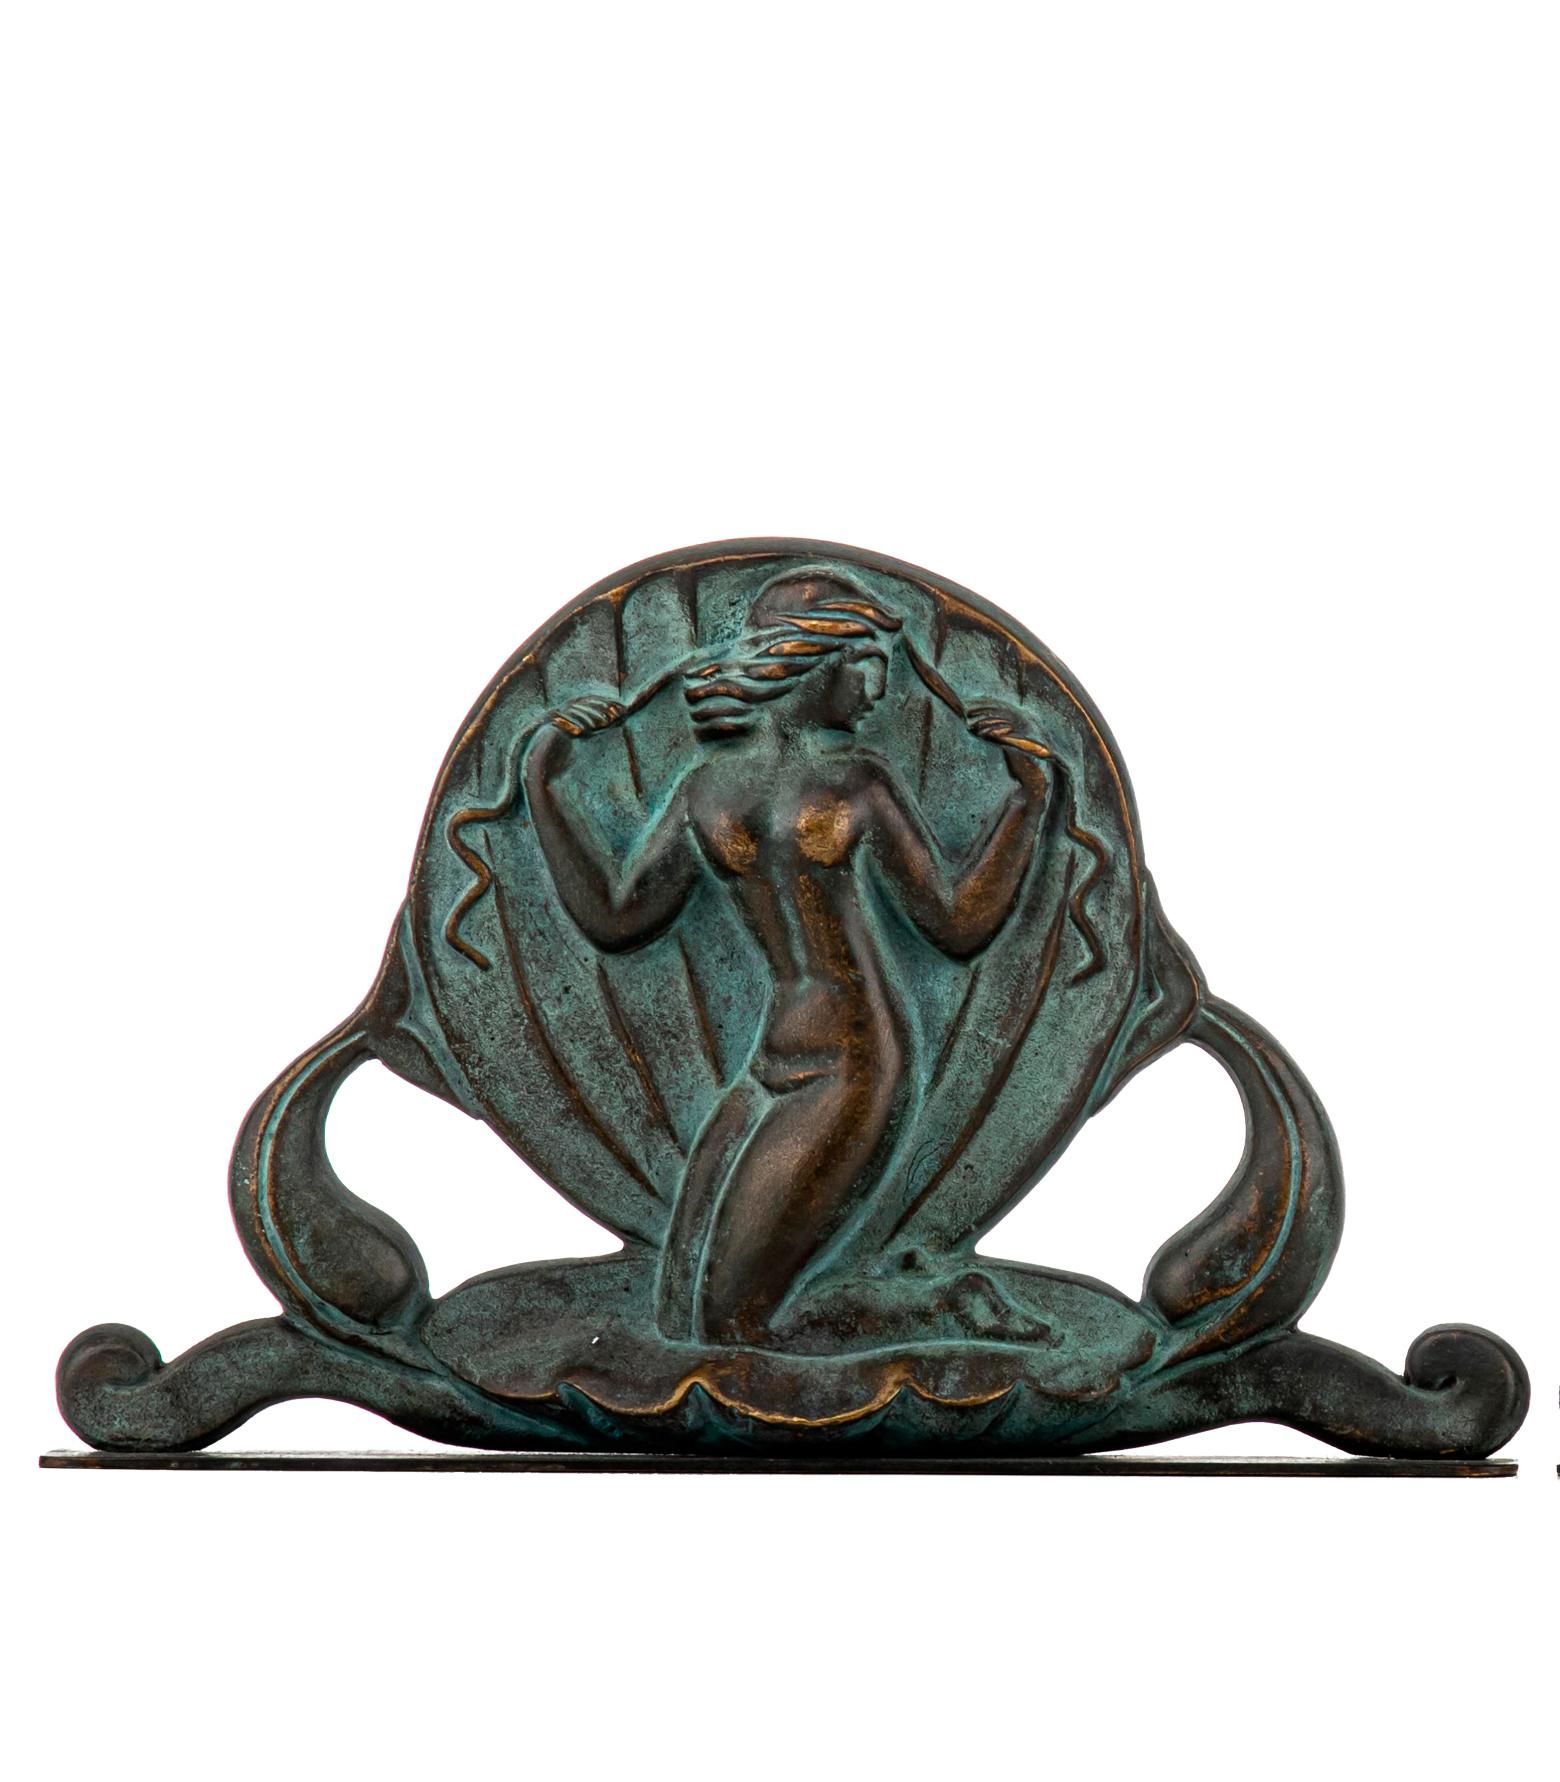 Swedish Art Deco bookends in bronze by Oscar Andersson for Ystad Metall. Bookends cast in Bronze. Made in Sweden, 1920s. The Birth of the nude Venus in a giant scallop shell. Both stamped O. A. (Oscar Andersson) and Ystad Metall.